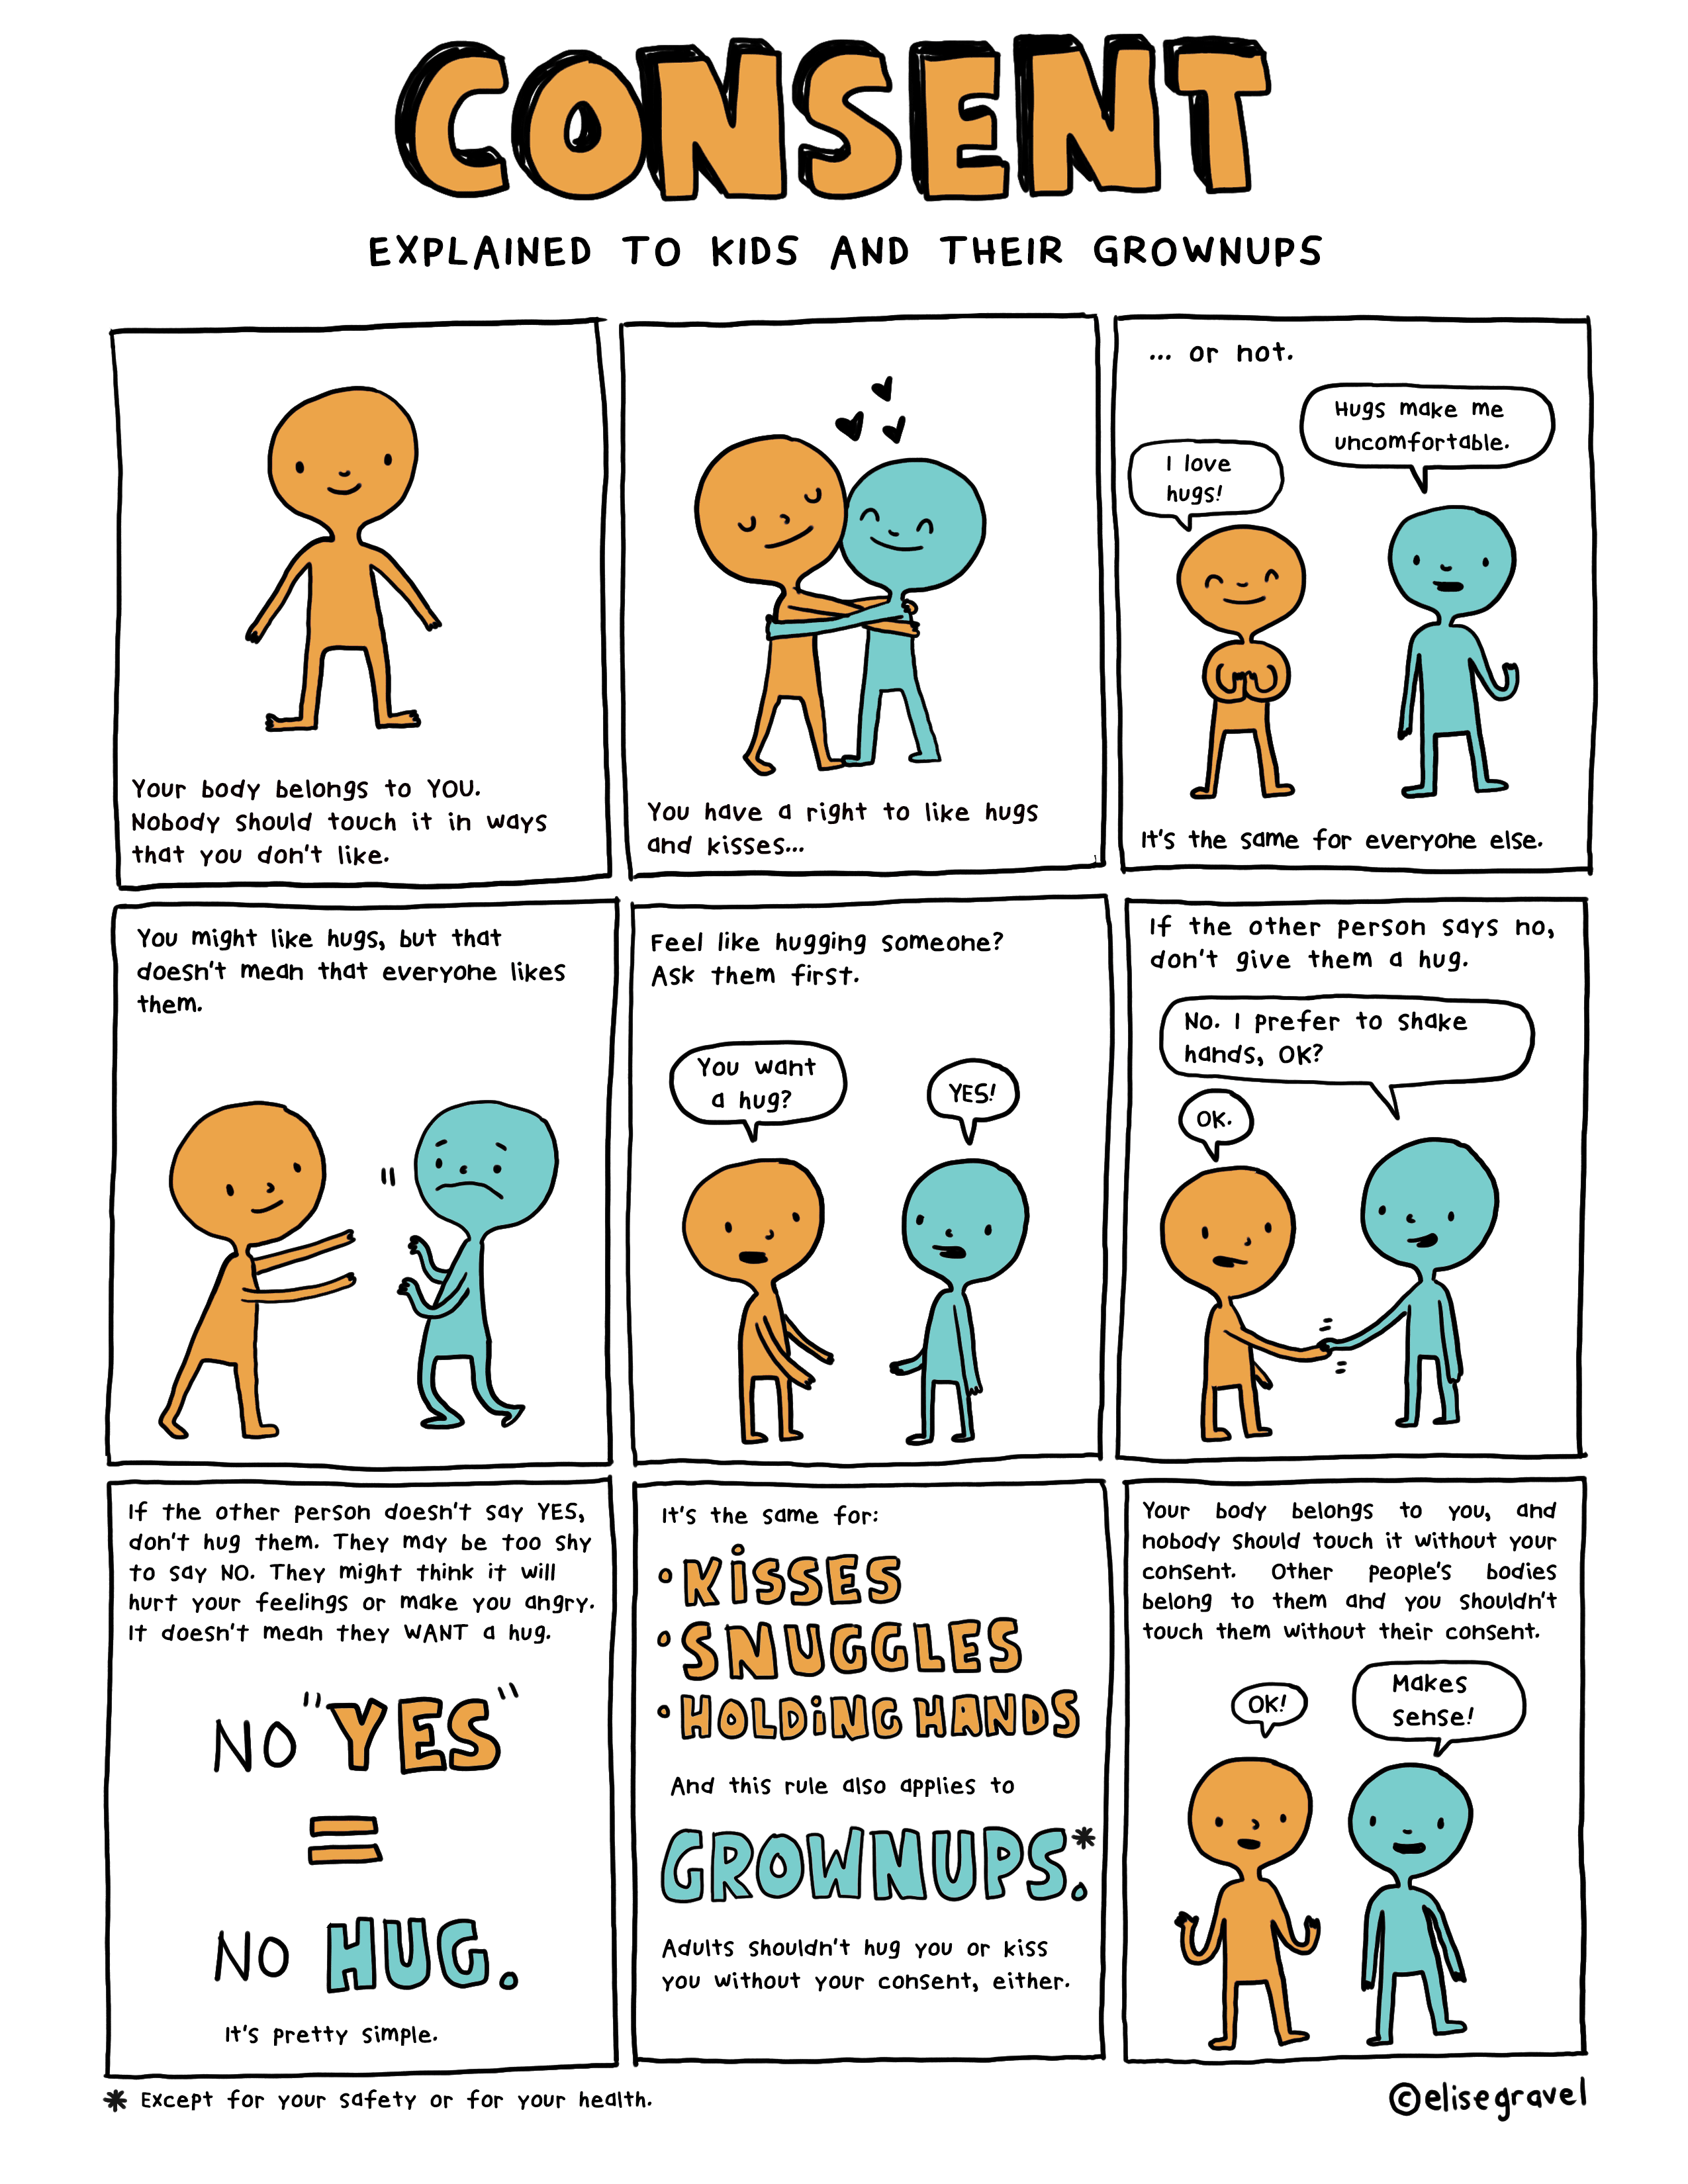 Consent explained to kids